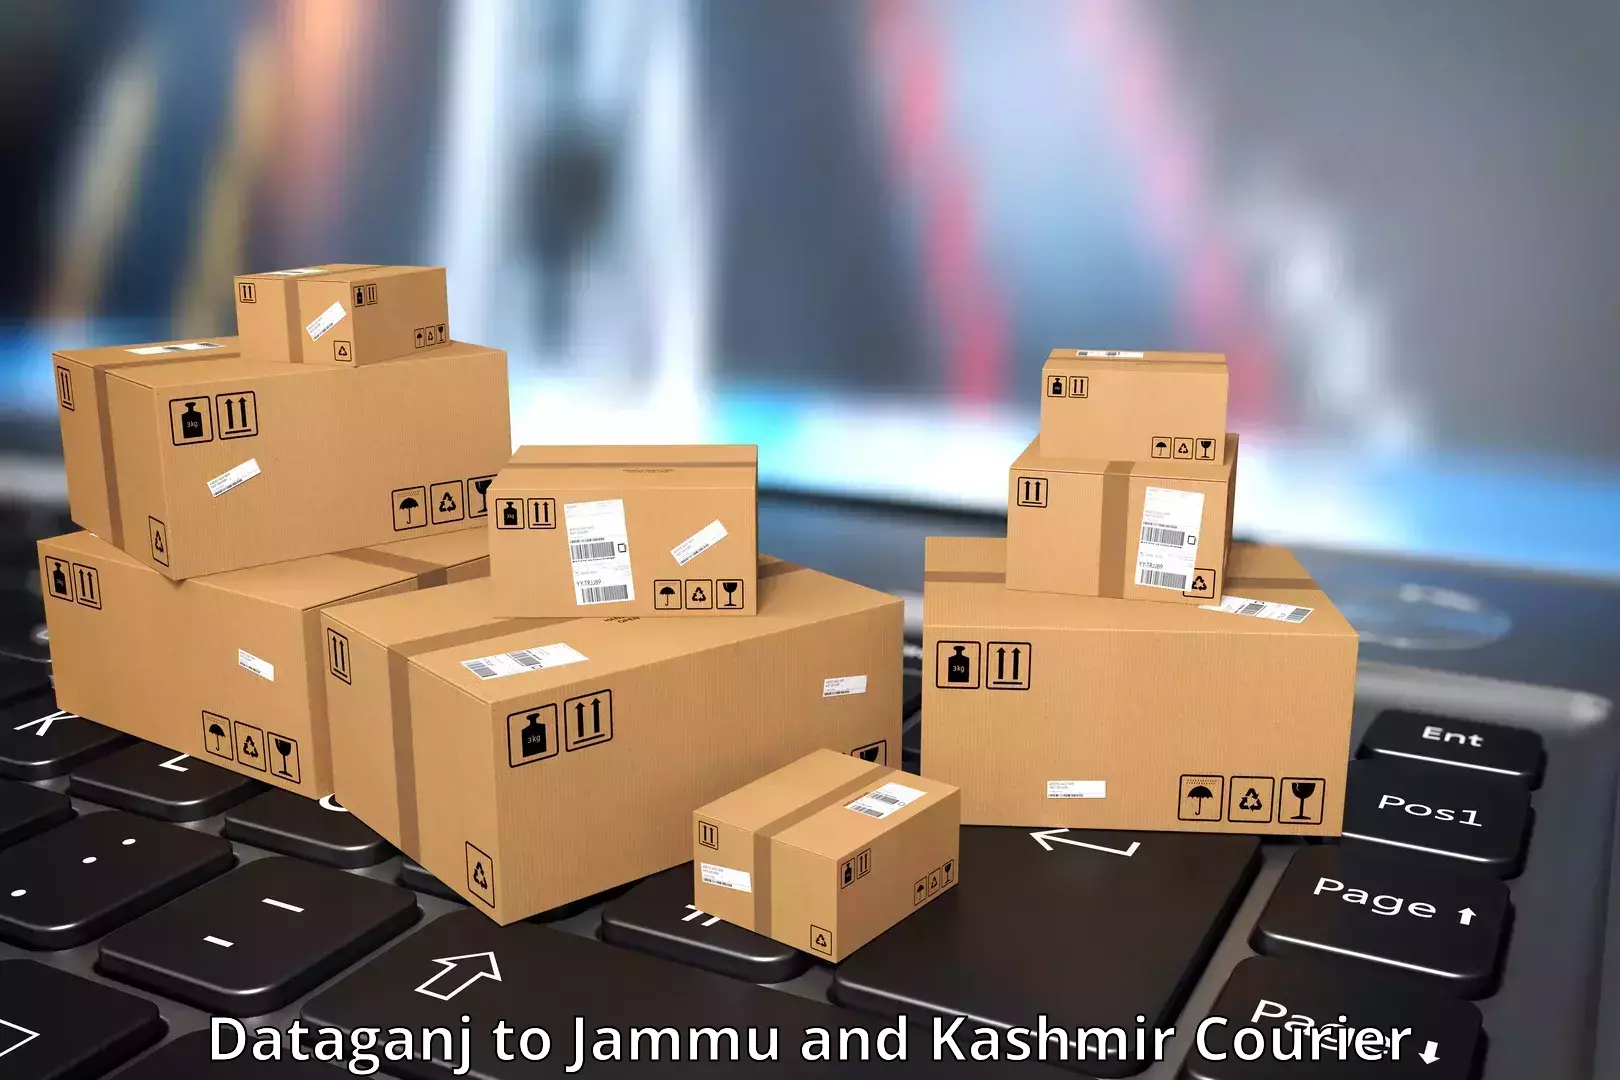 End-to-end delivery Dataganj to Pulwama